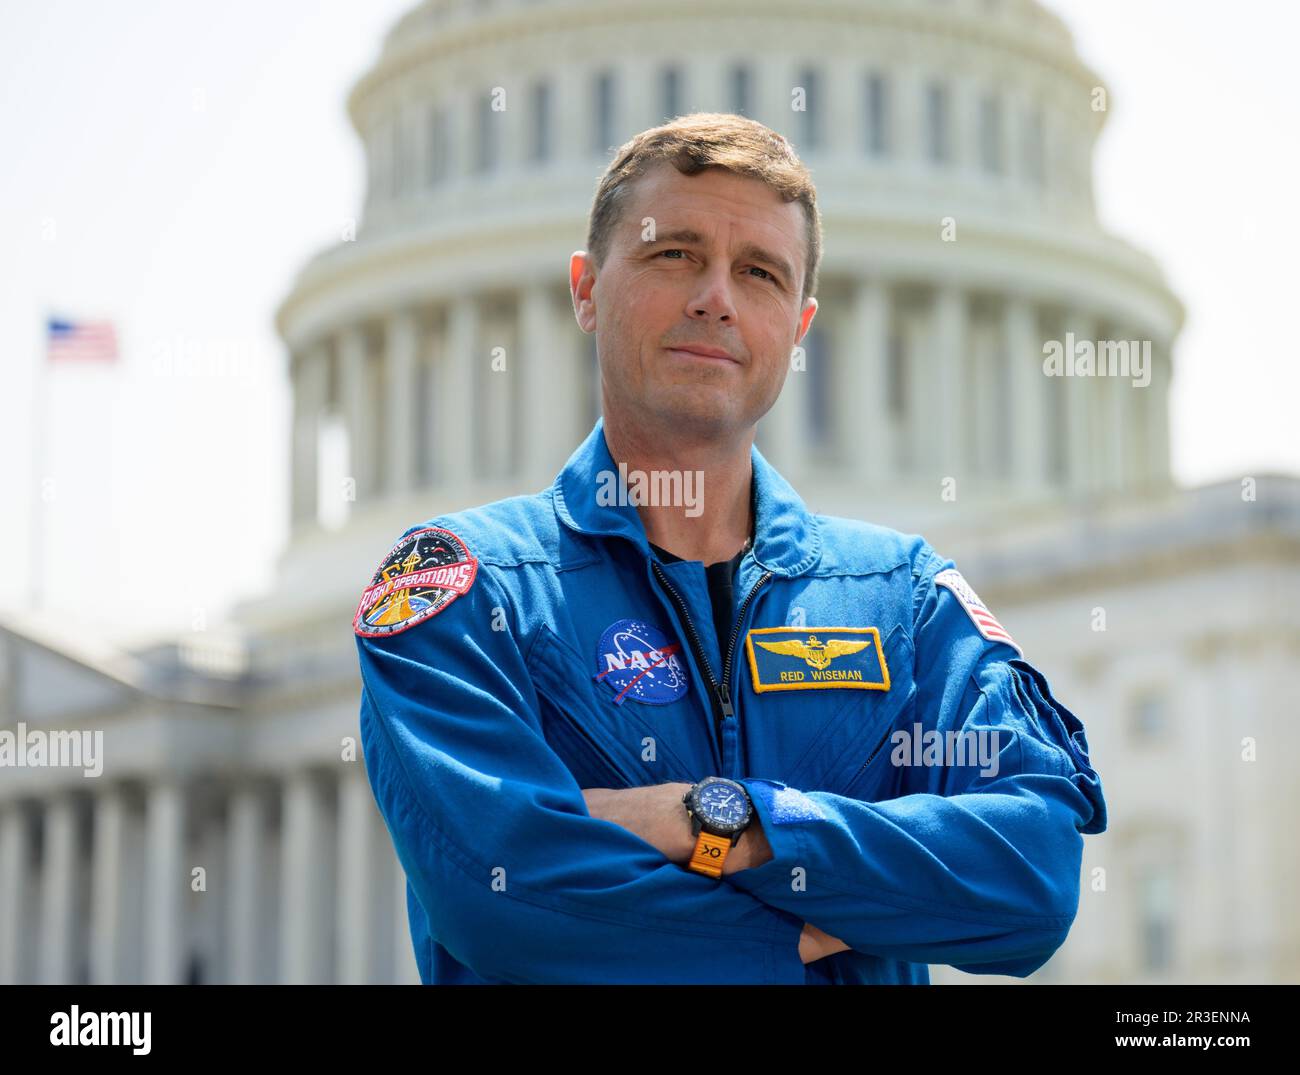 Washington, United States. 18 May, 2023. Artemis II astronaut Reid Wiseman during a press conference to discuss the upcoming moon mission on Capitol Hill, May 18, 2023 in Washington, D.C. Astronauts Jeremy Hansen, Victor Glover, Reid Wiseman, and Christina Hammock Koch visited Congress to brief members on the mission to the moon. Credit: Bill Ingalls/NASA/Alamy Live News Stock Photo